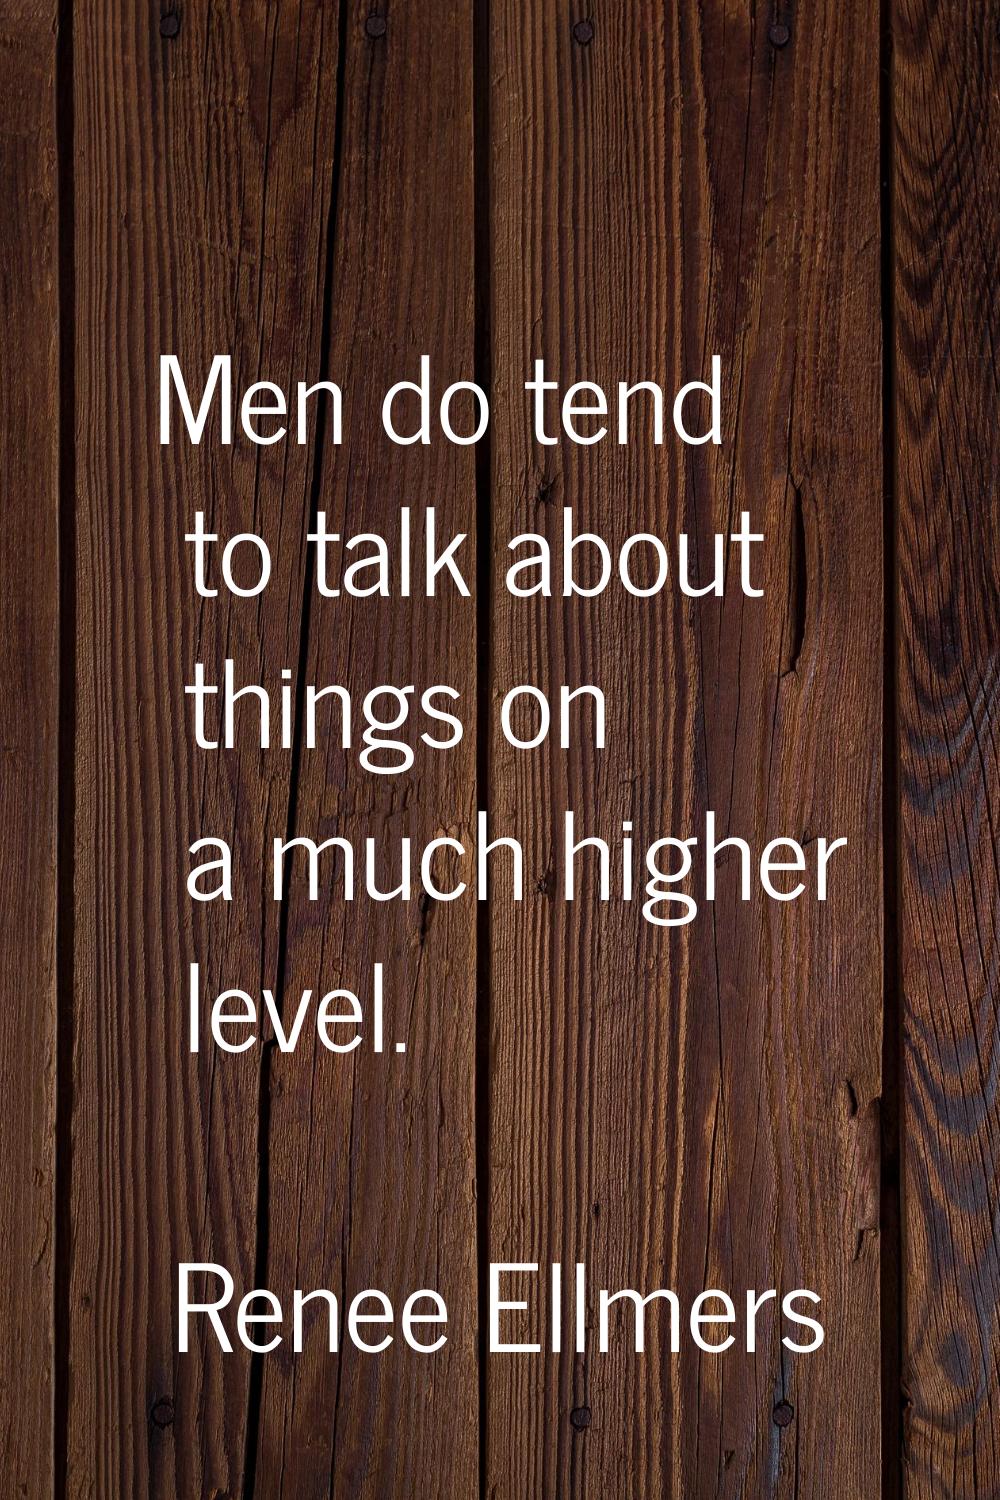 Men do tend to talk about things on a much higher level.